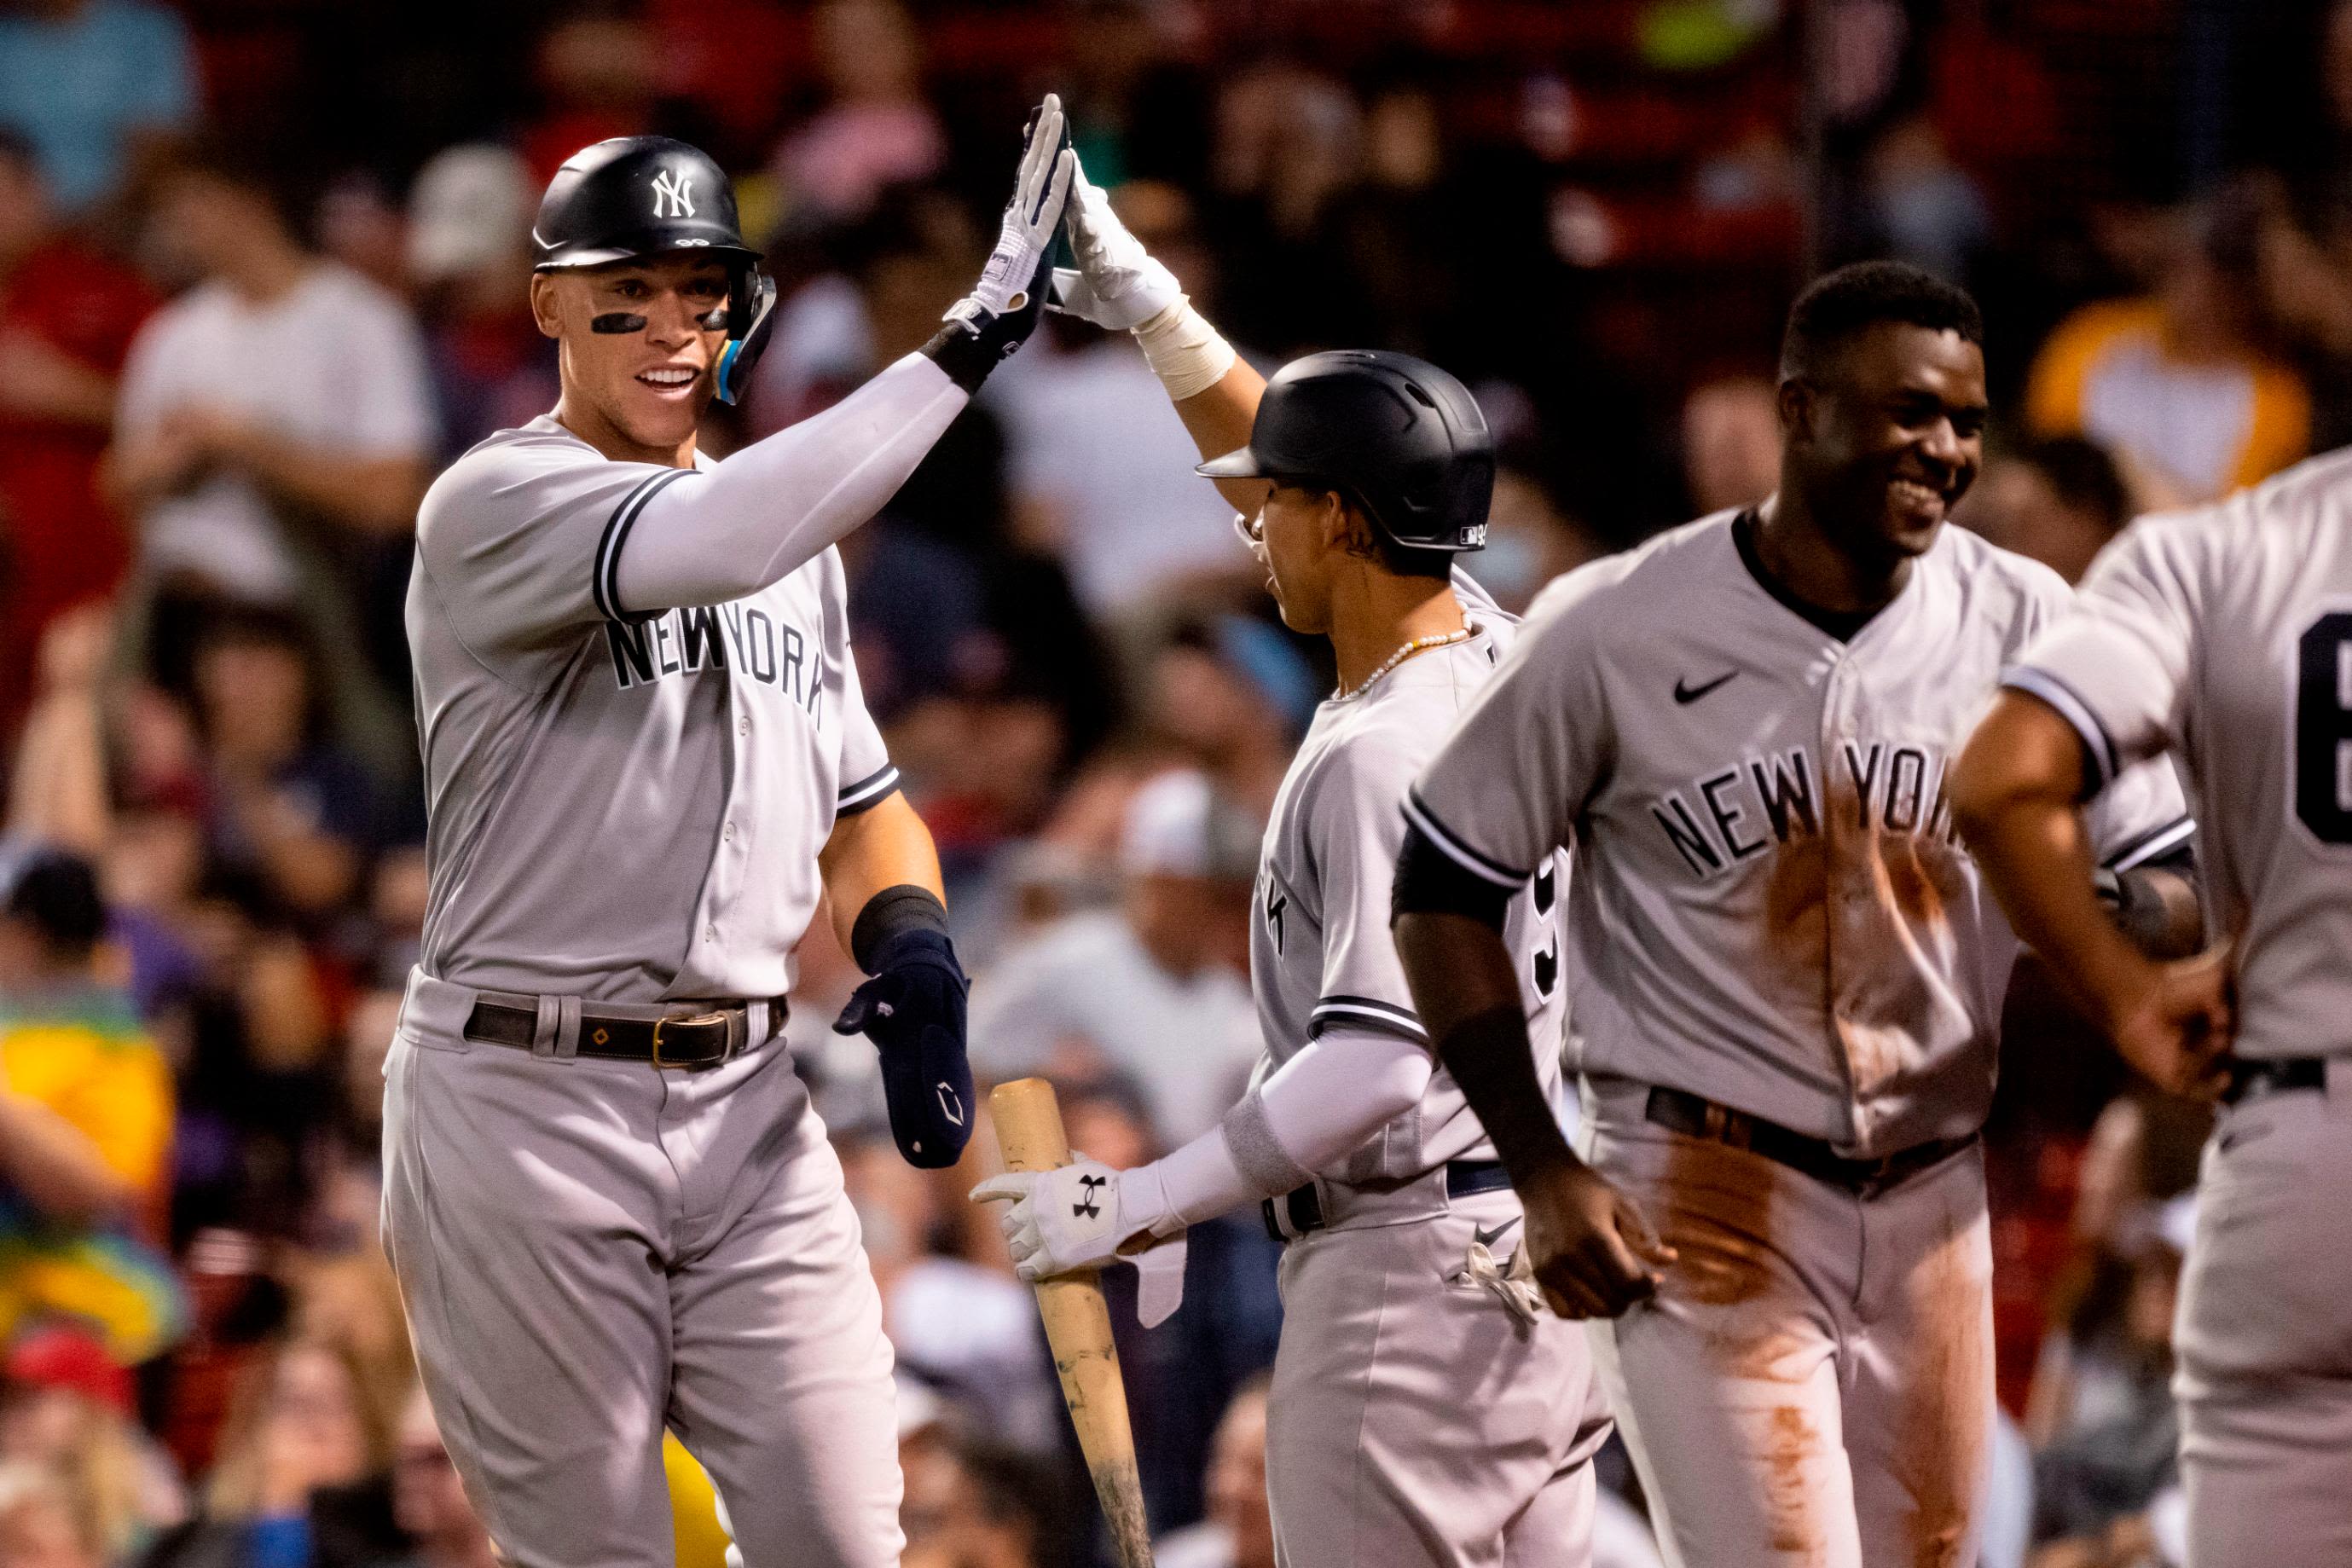 Aaron Judge adds home runs No. 56 & 57 in his pursuit of Babe Ruth